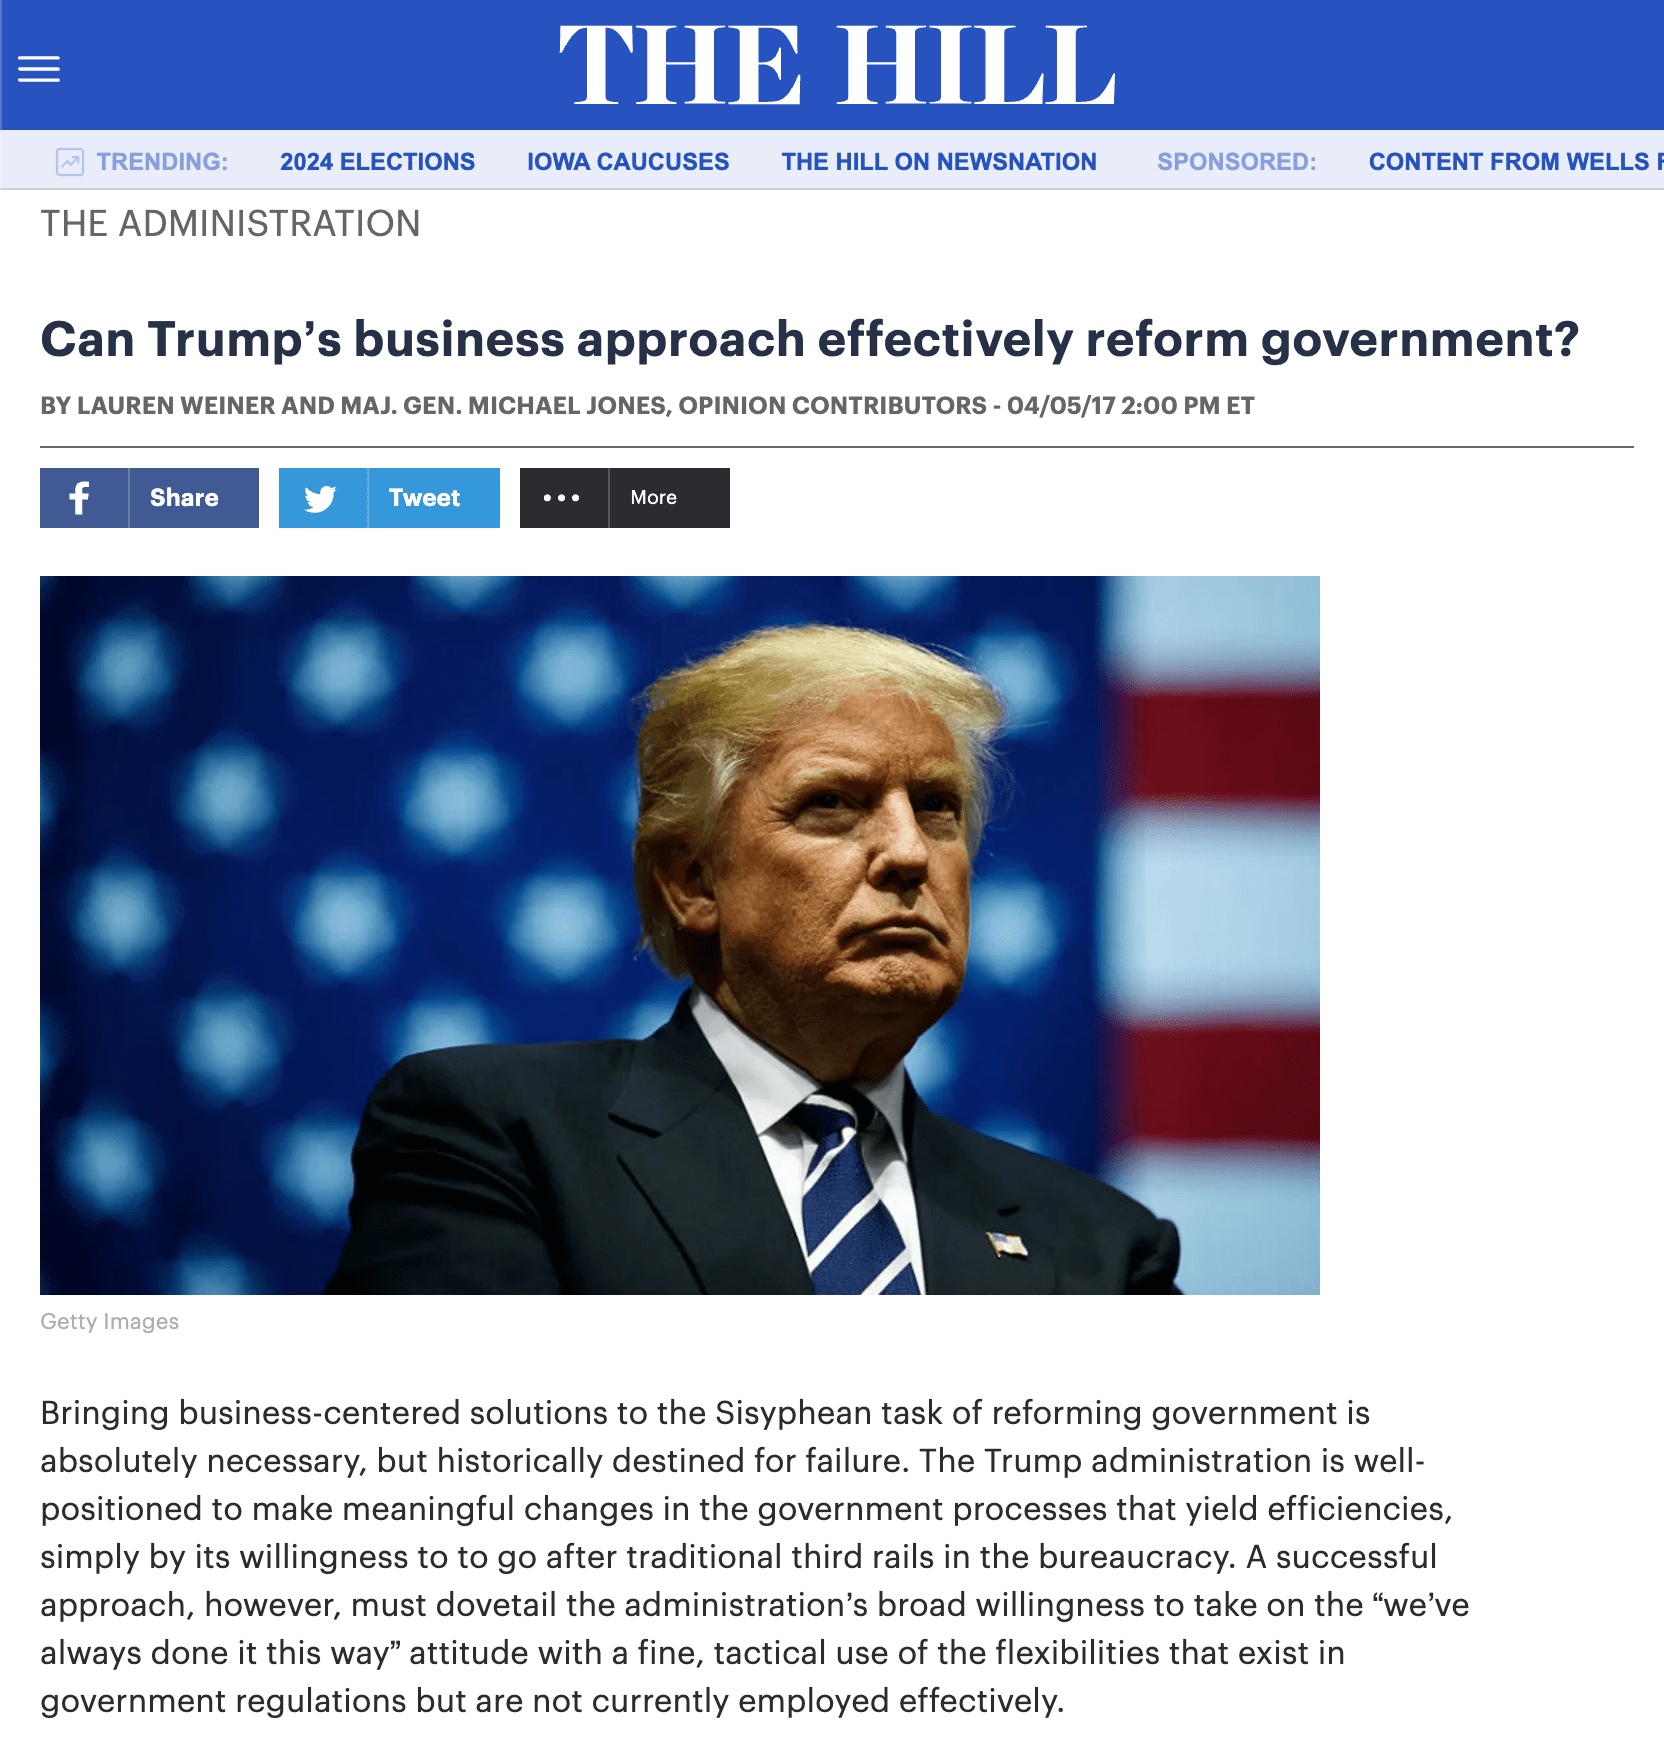 Can Trump’s business approach effectively reform government?